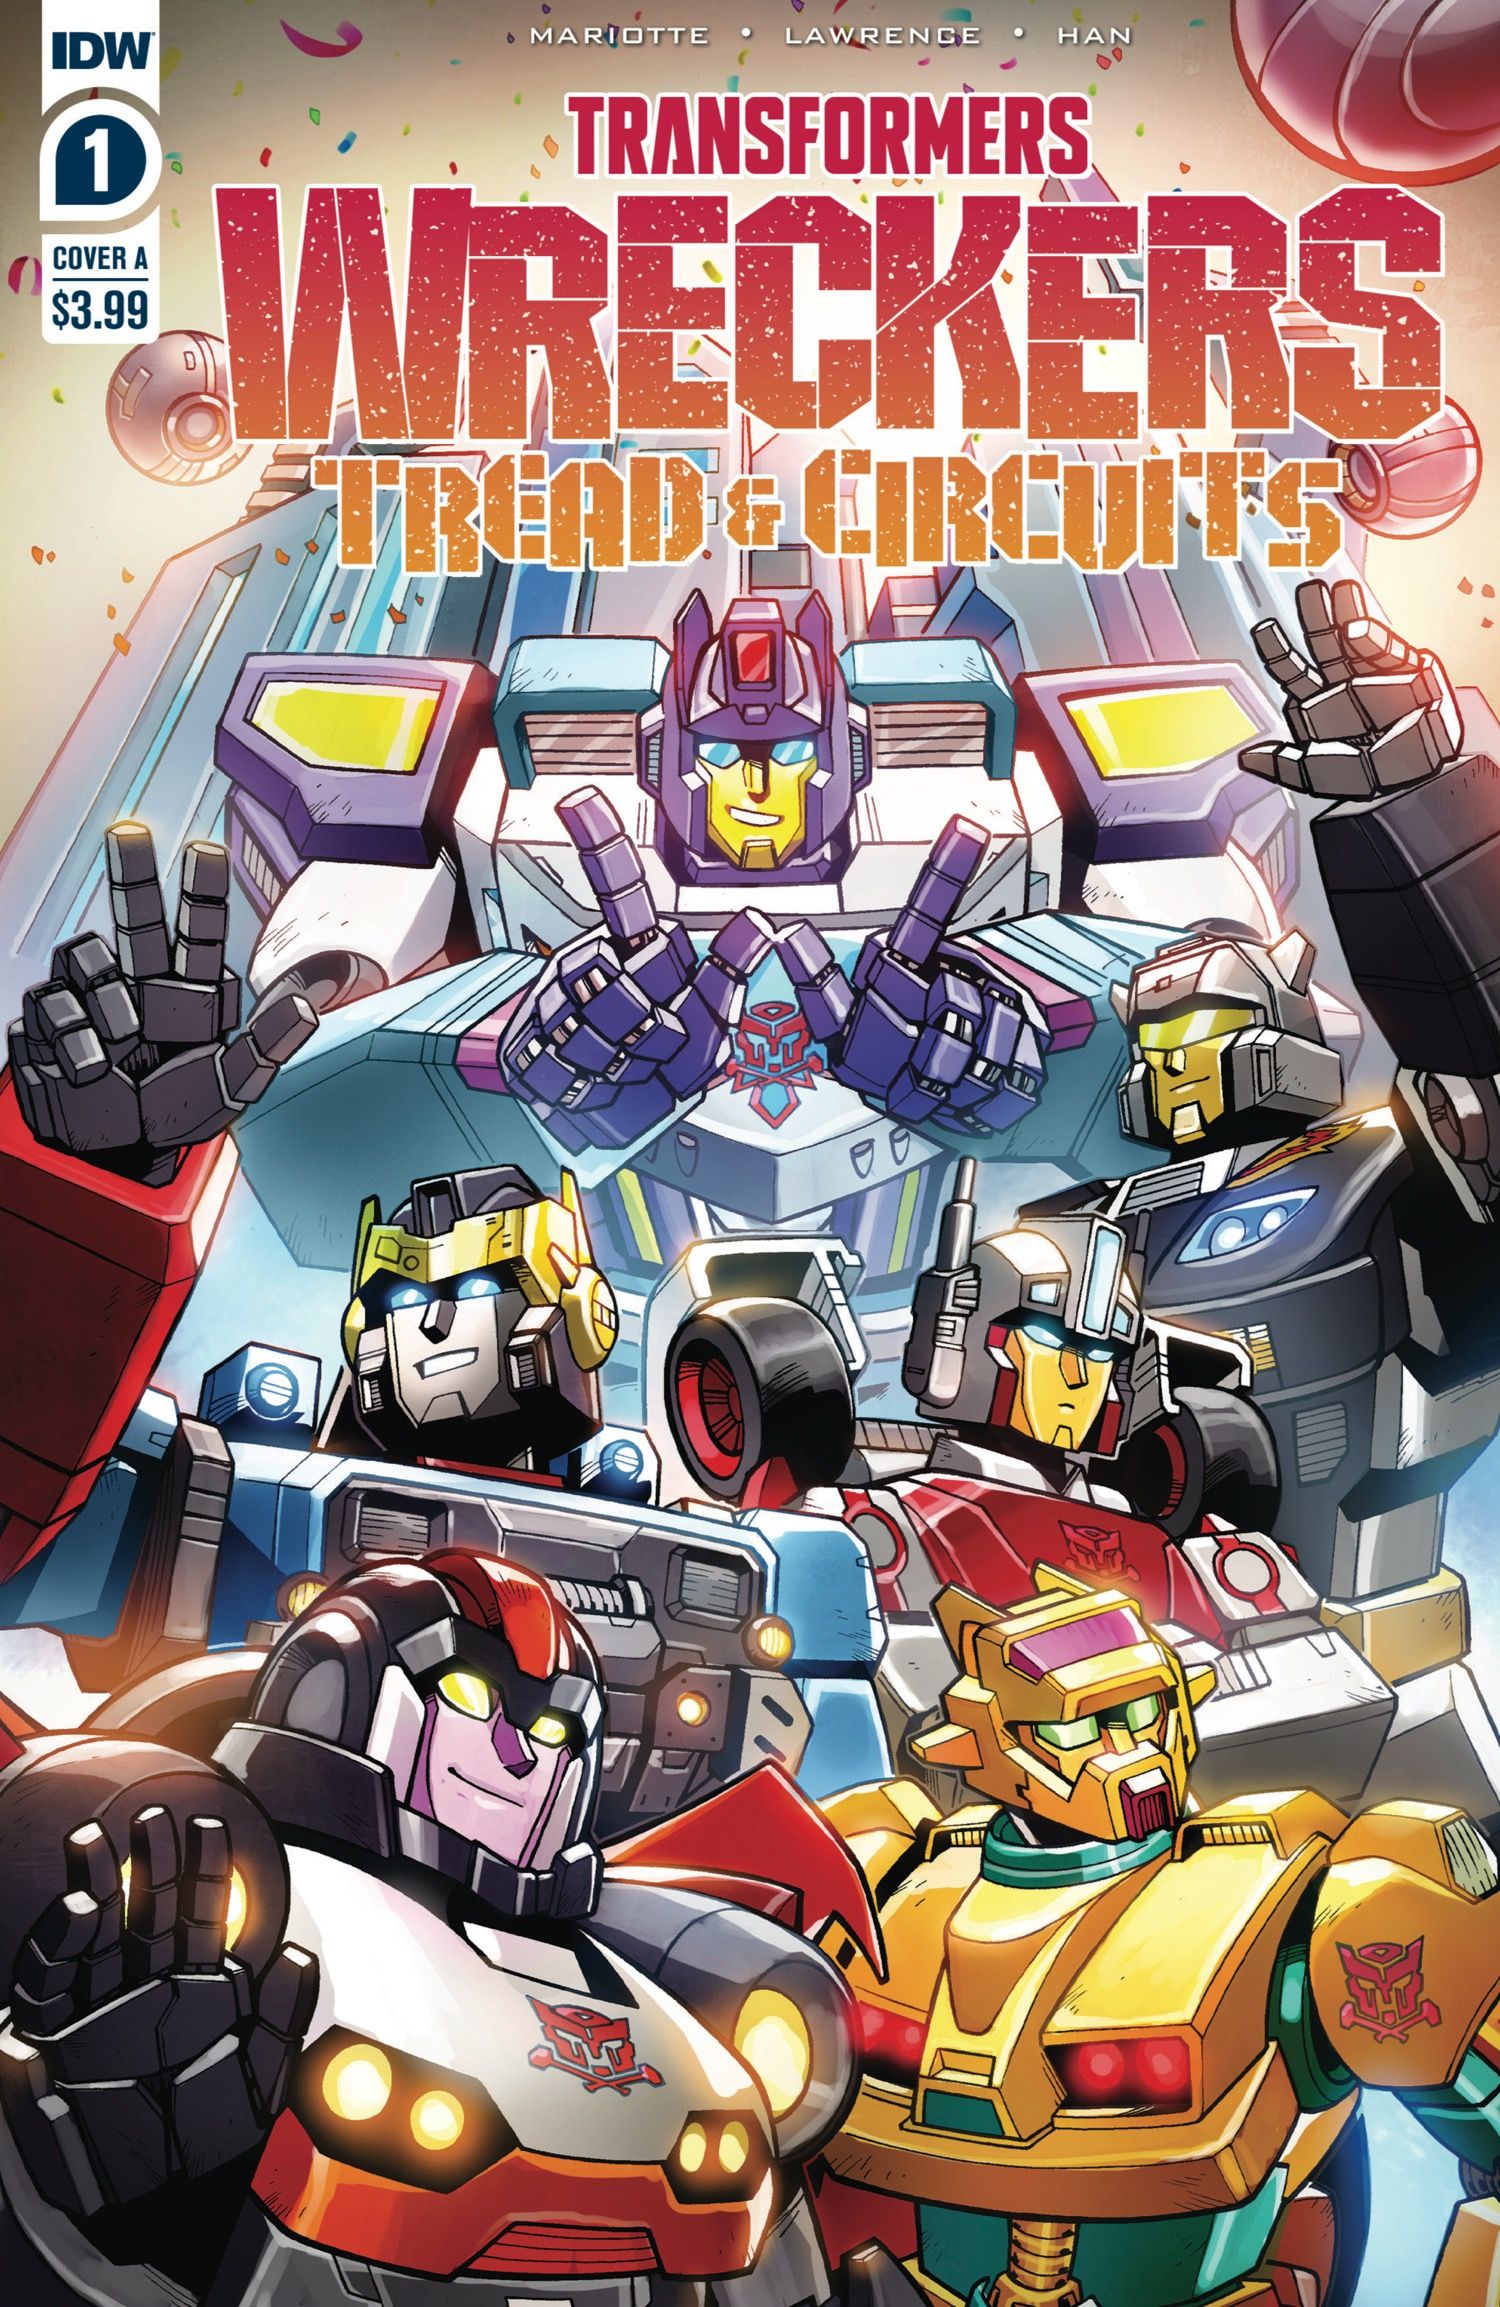 Transformers: Wreckers - Tread &amp; Circuits #1 Cover A